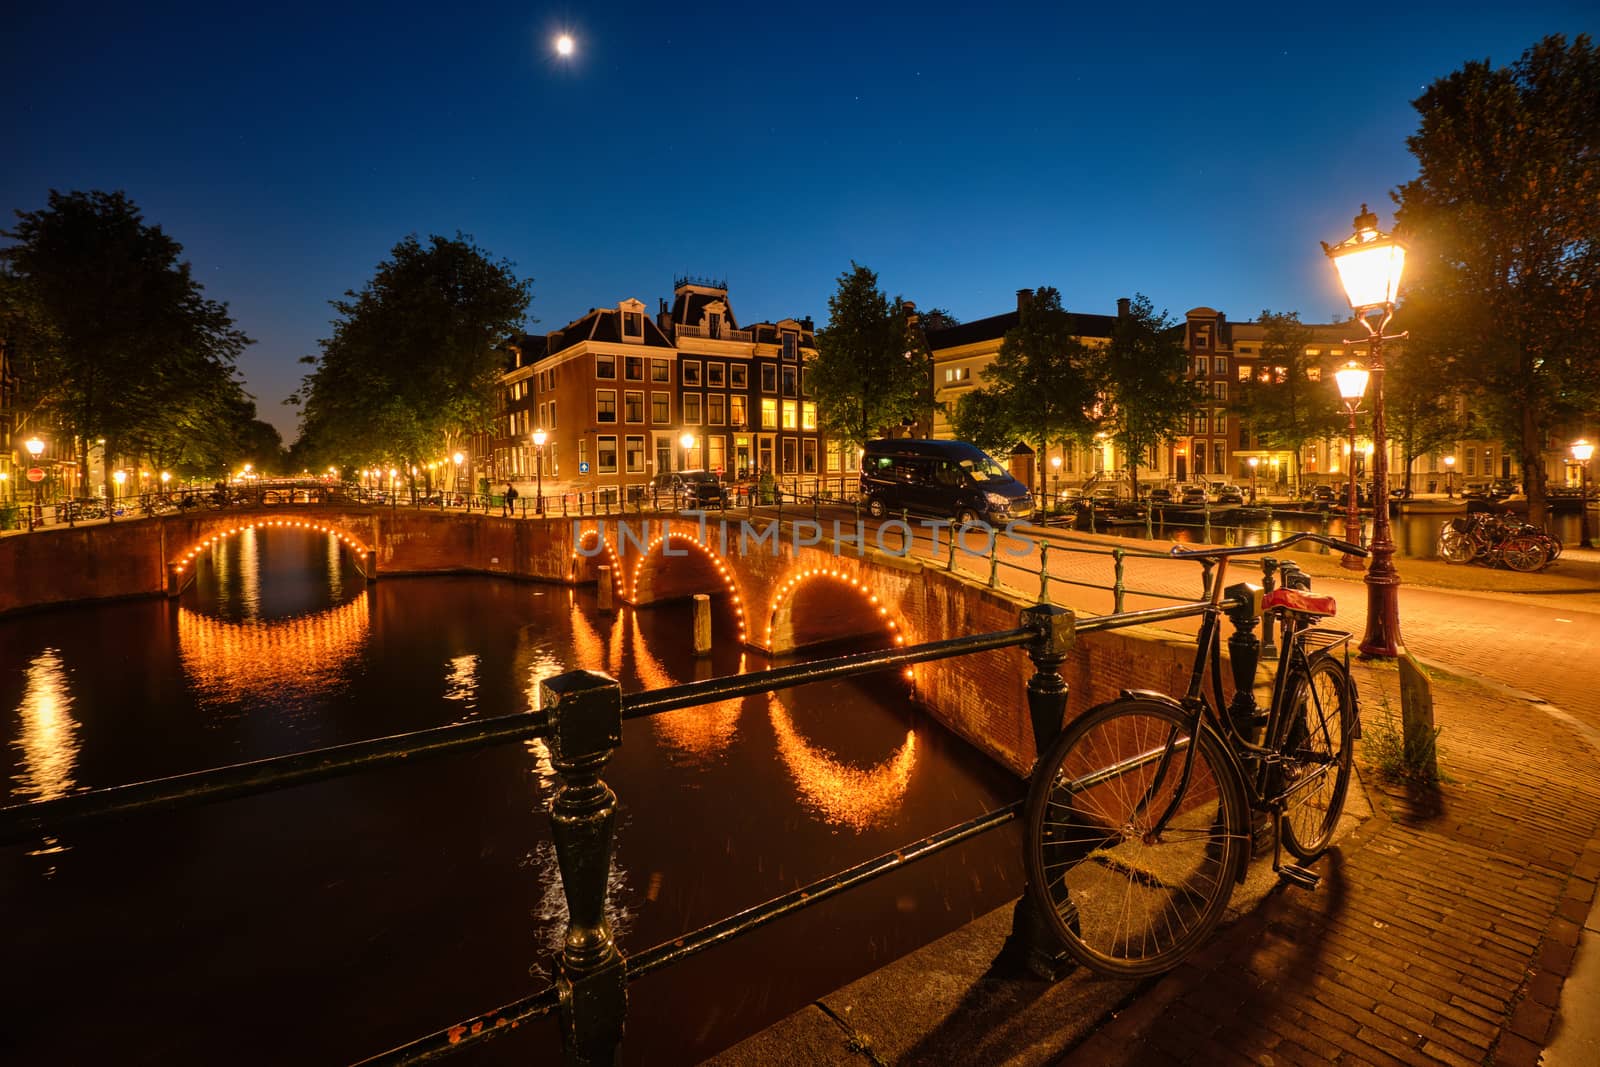 Amterdam canal, bridge and medieval houses in the evening by dimol